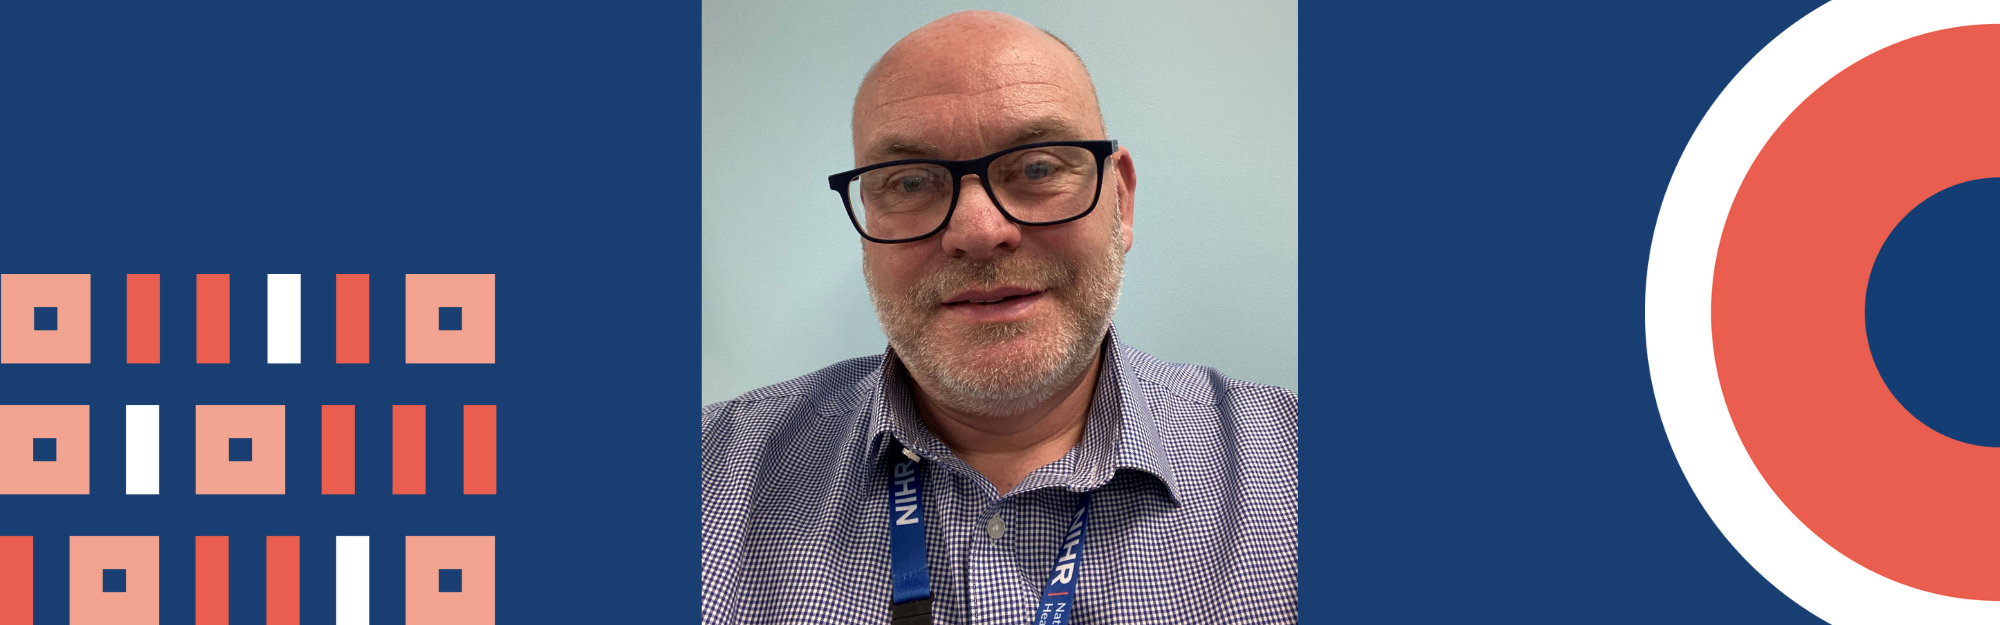 Dr Frazer Underwood has been appointed as our first NMAHP Research Lead